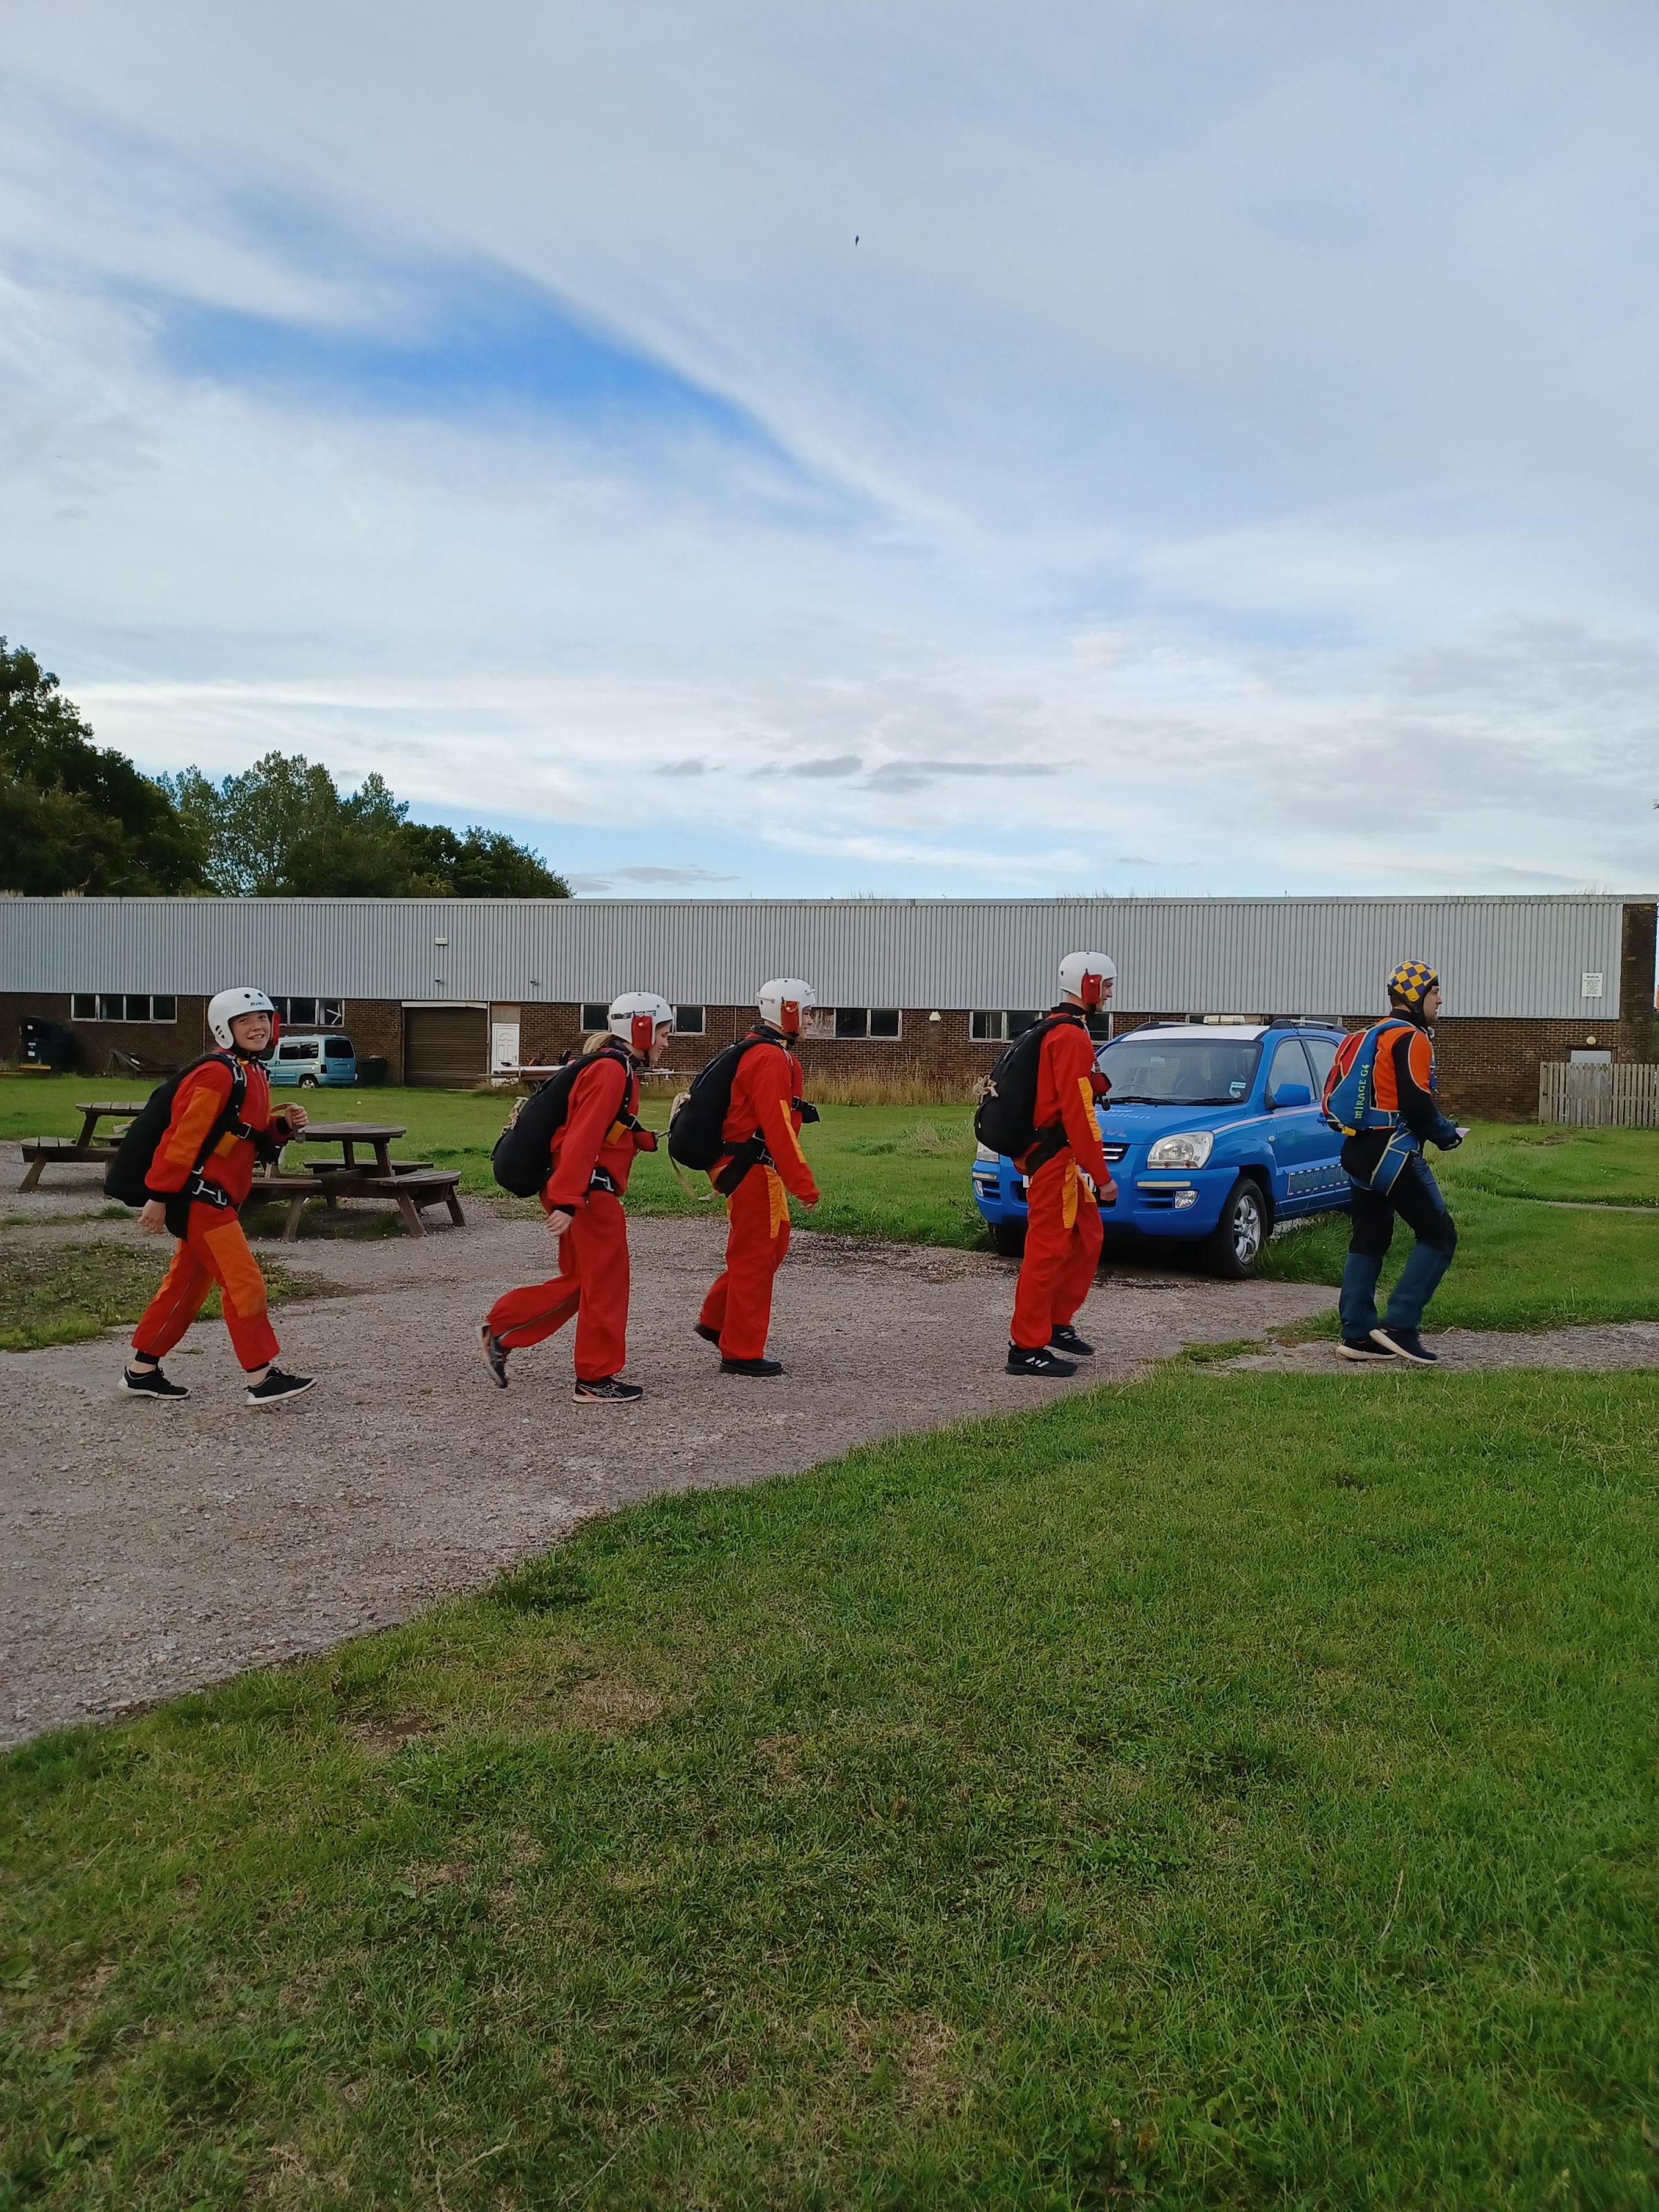 The 19th Ayrshire Explorers Scout group took part in a parachute jump at Strathallan Airfield (Photo - Alan Roy)